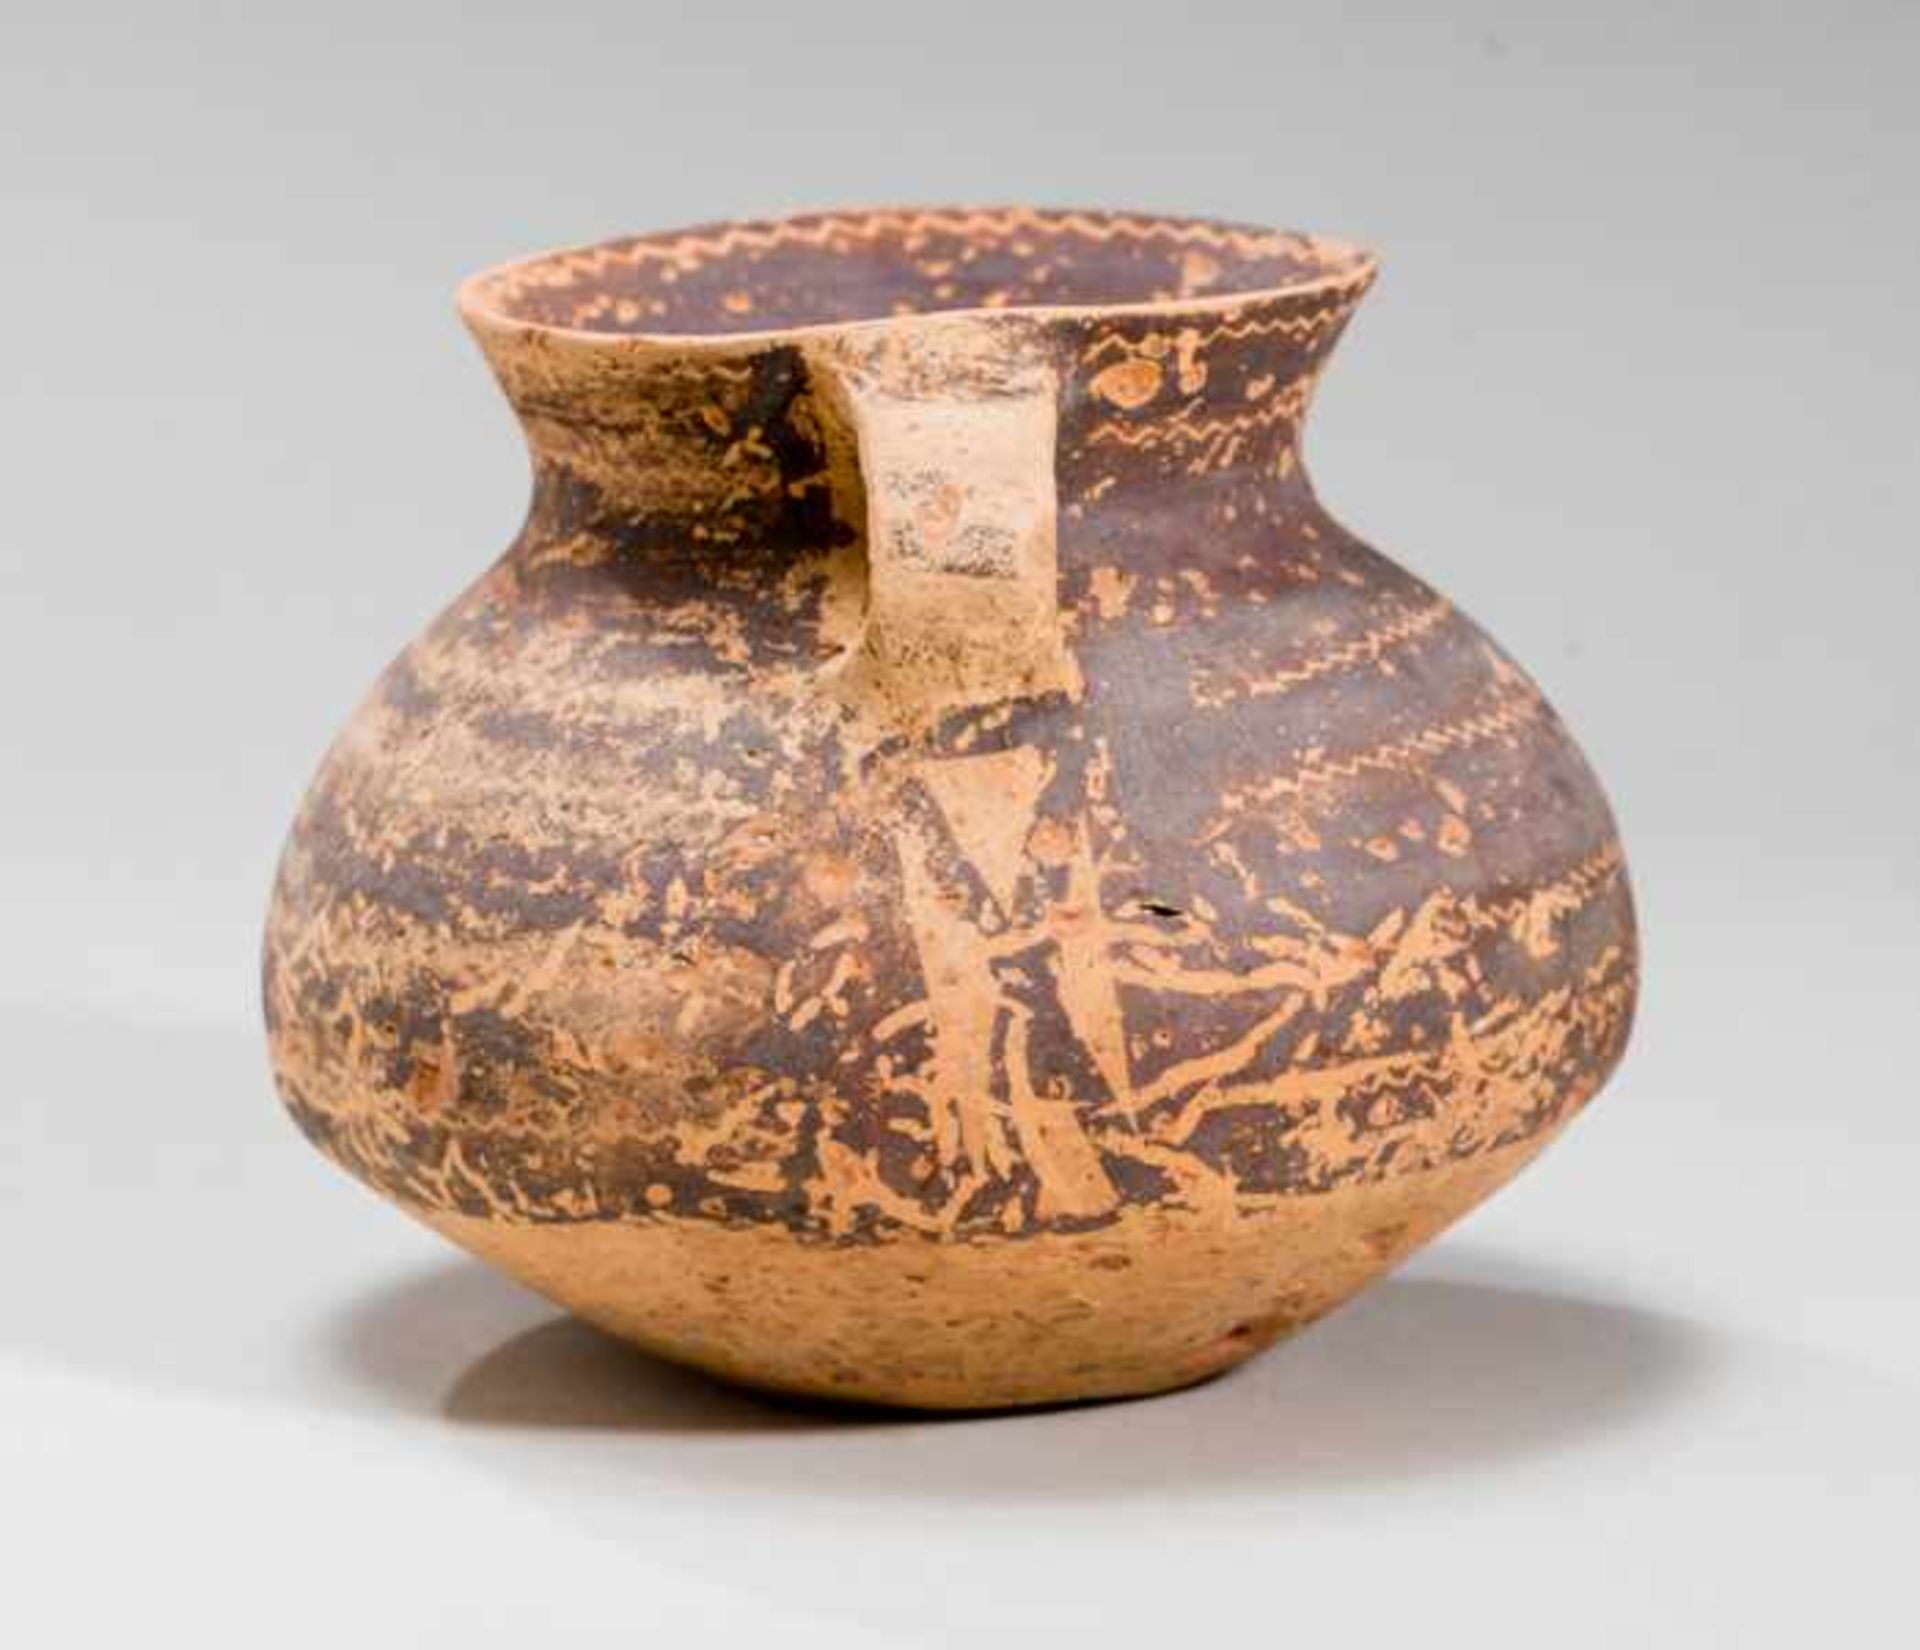 SMALL VESSEL WITH HANDLES Terracotta with the original painting. China, Yangshao culture, Majiayao, - Image 3 of 6